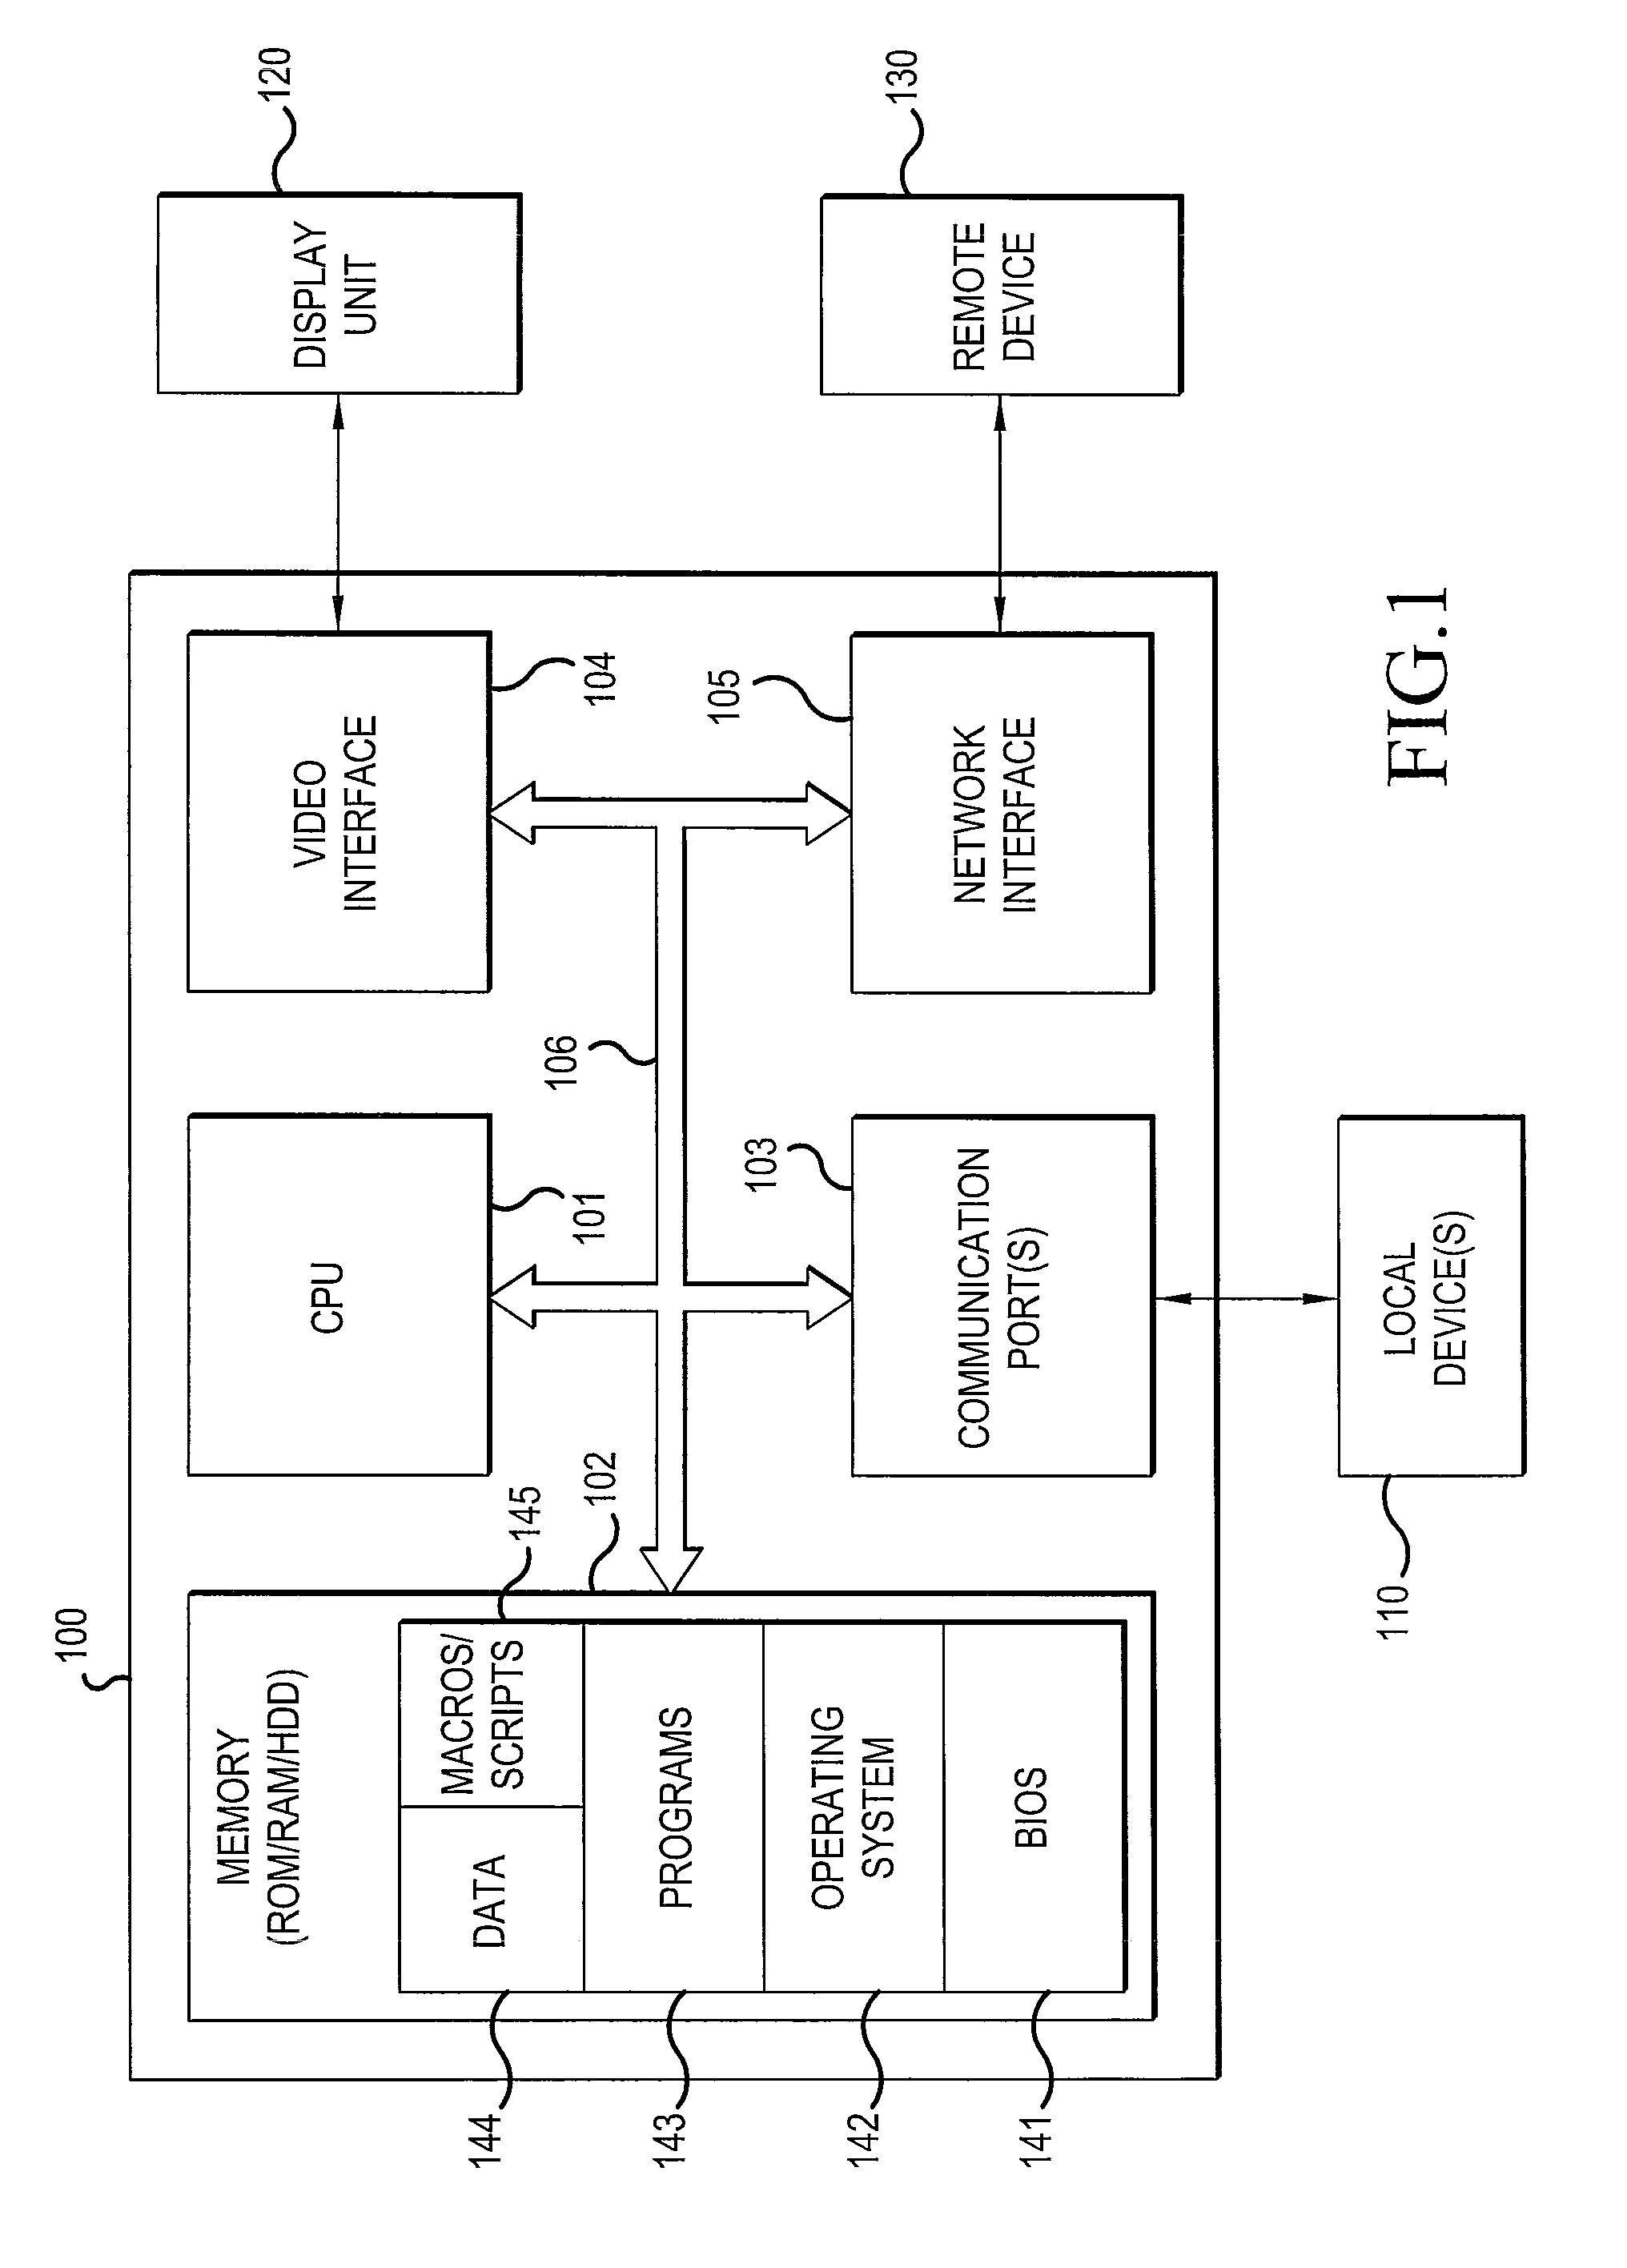 Method and device for configuring a user agent to operate as a web server